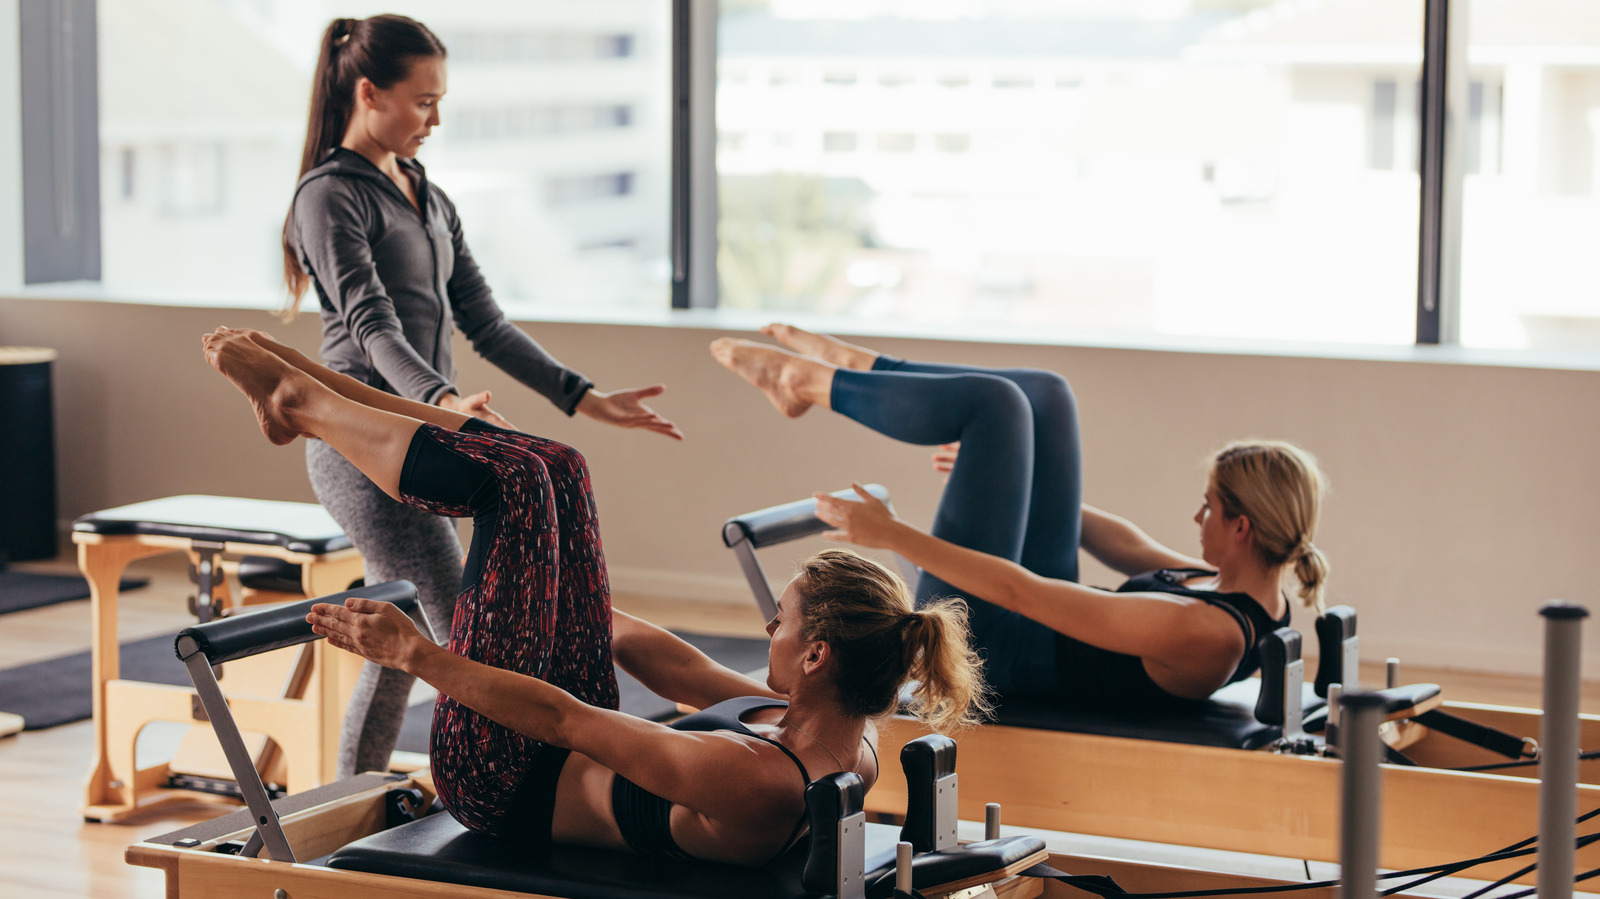 I Tried a Pilates Reformer Workout And Now Everything Hurts